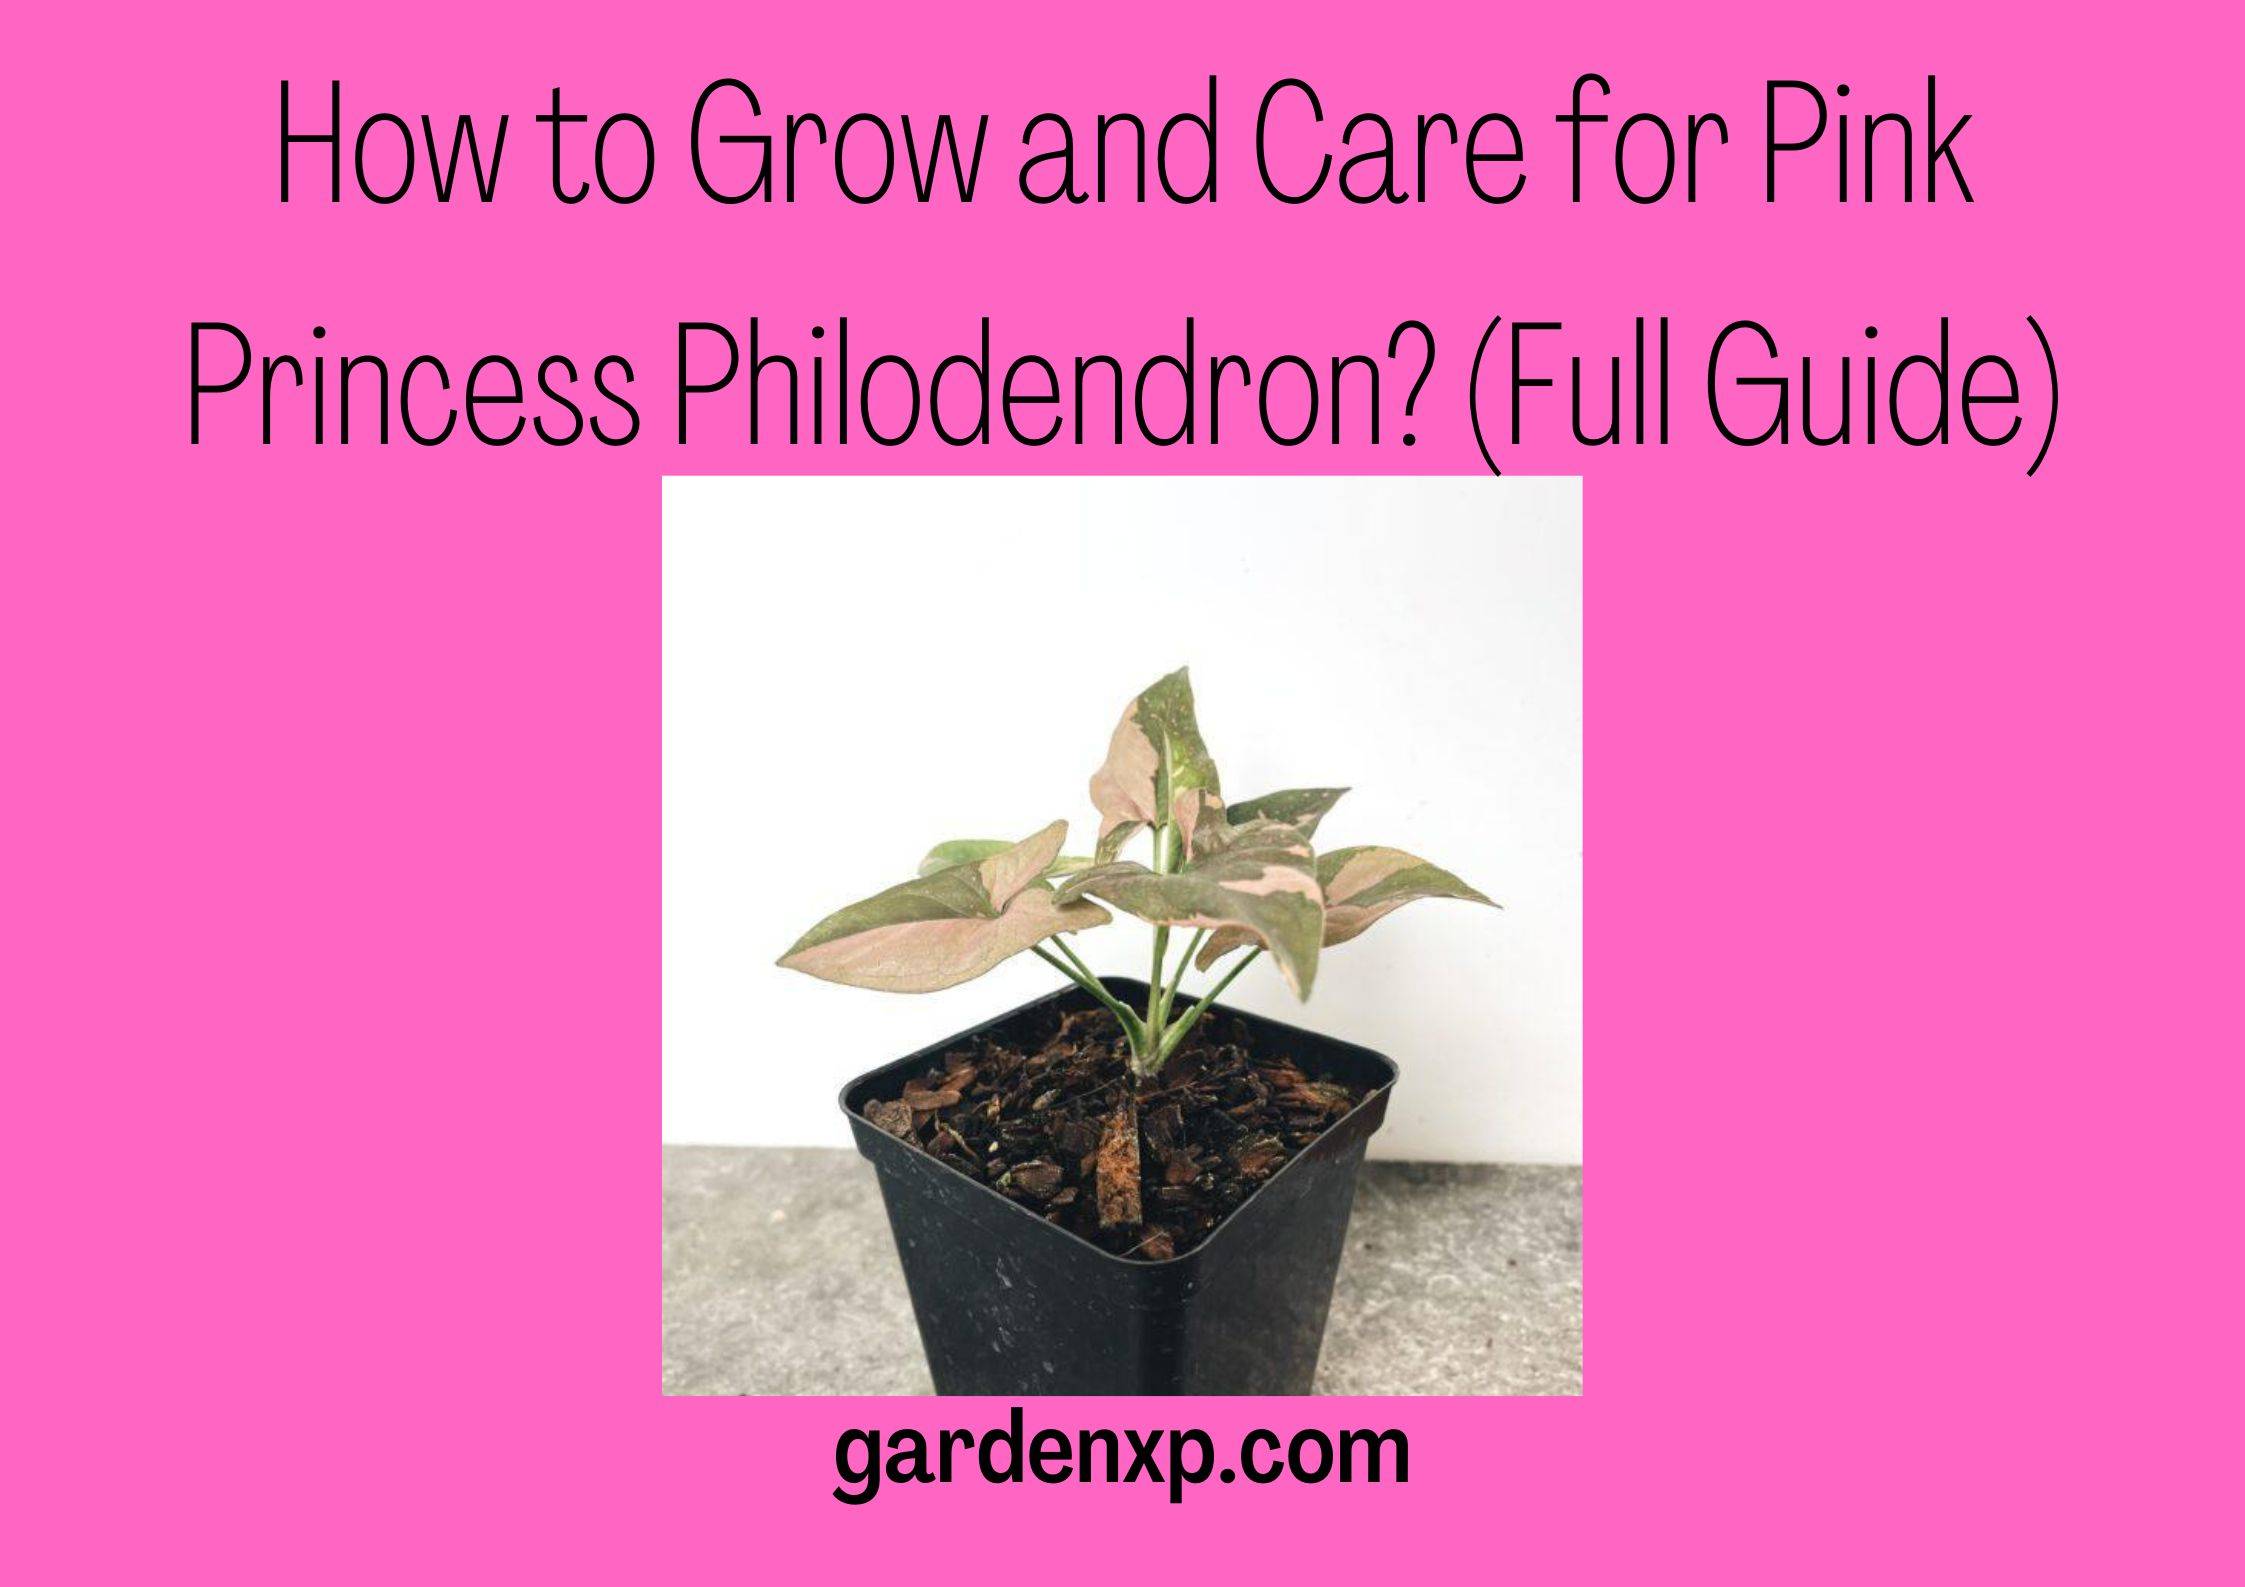 How to Grow and Care for Pink Princess Philodendron? (Full Guide)